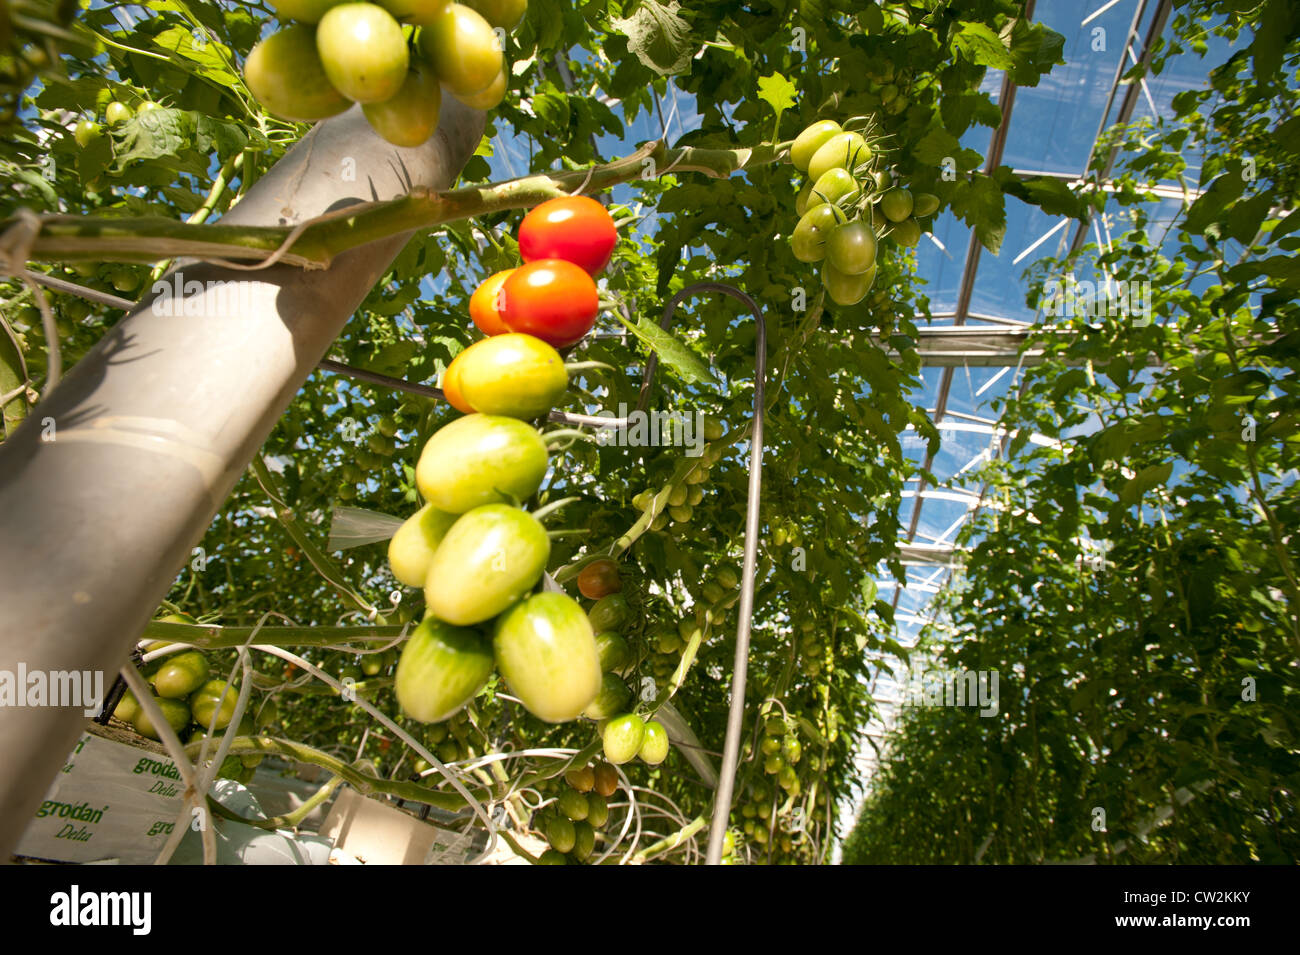 Hydroponically grown tomatoes Stock Photo